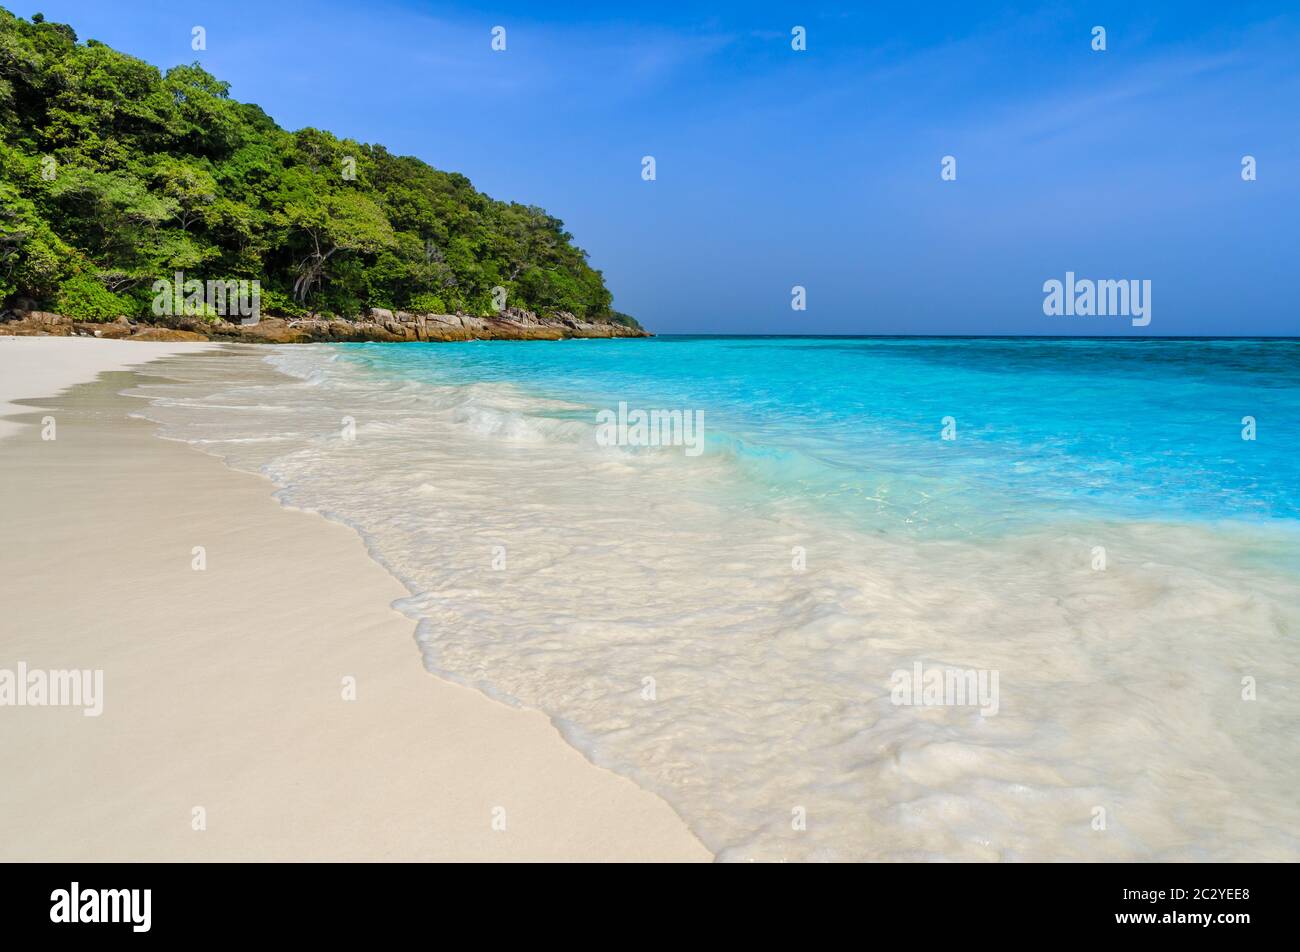 Summer view of tropical white sand beach and turquoise clear Andaman sea in Phang Nga Province, Thailand Stock Photo